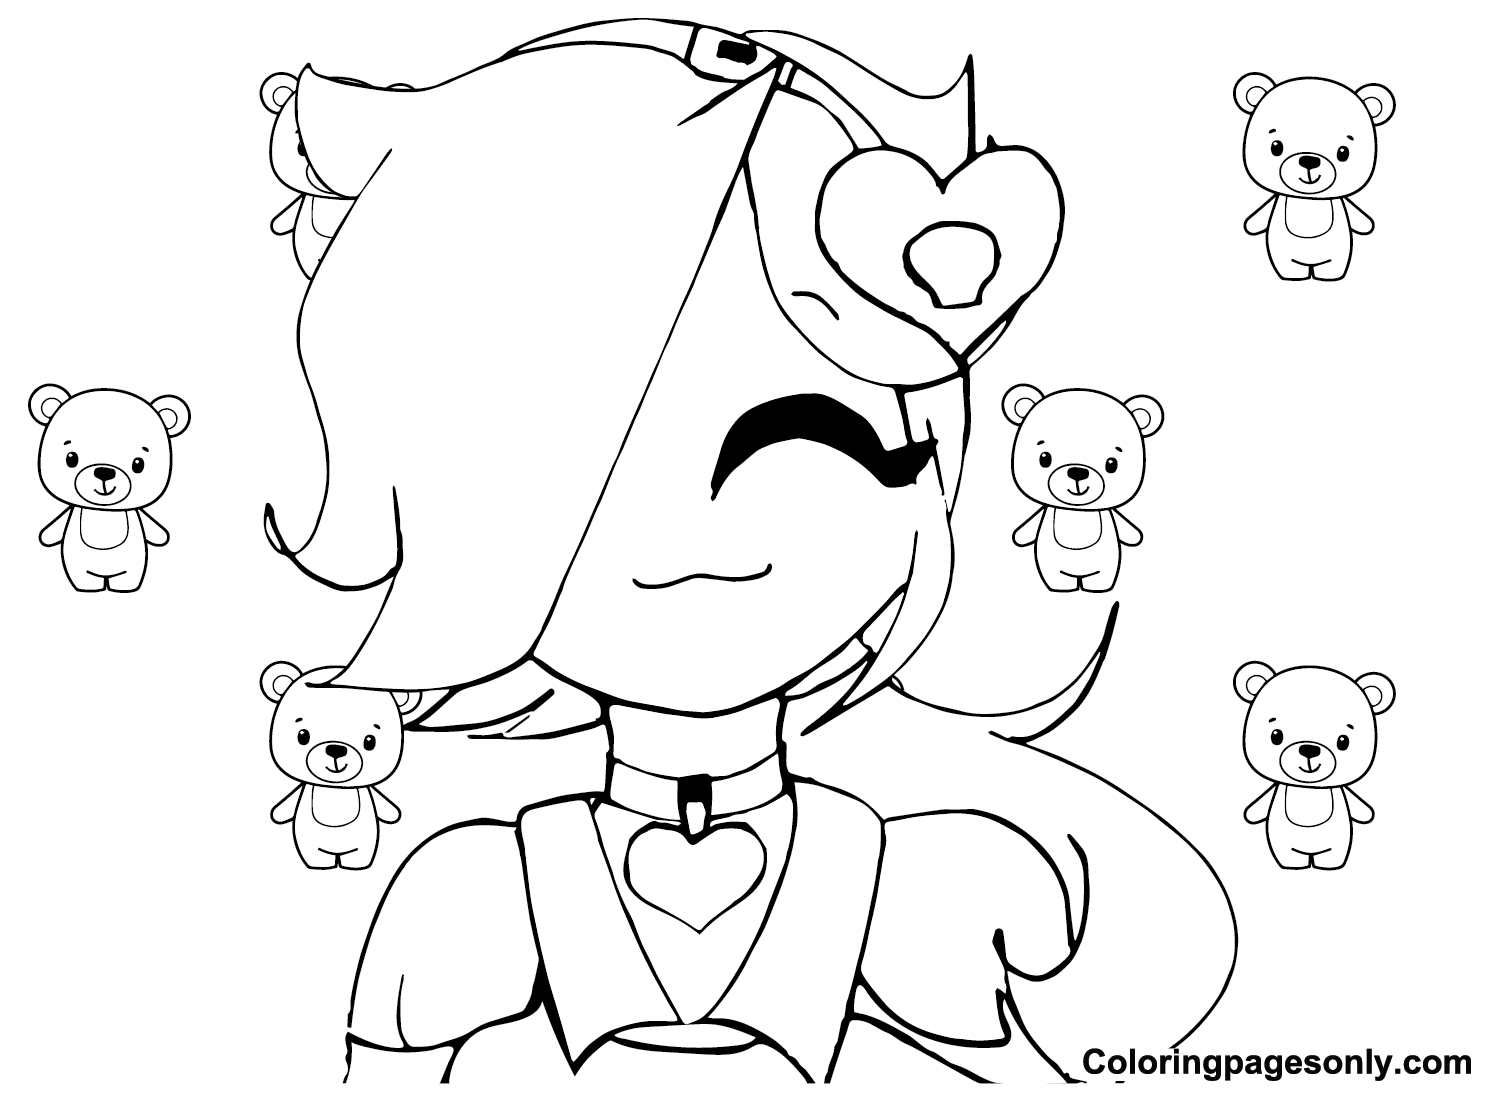 Lovely Colette Brawl Stars Coloring Pages